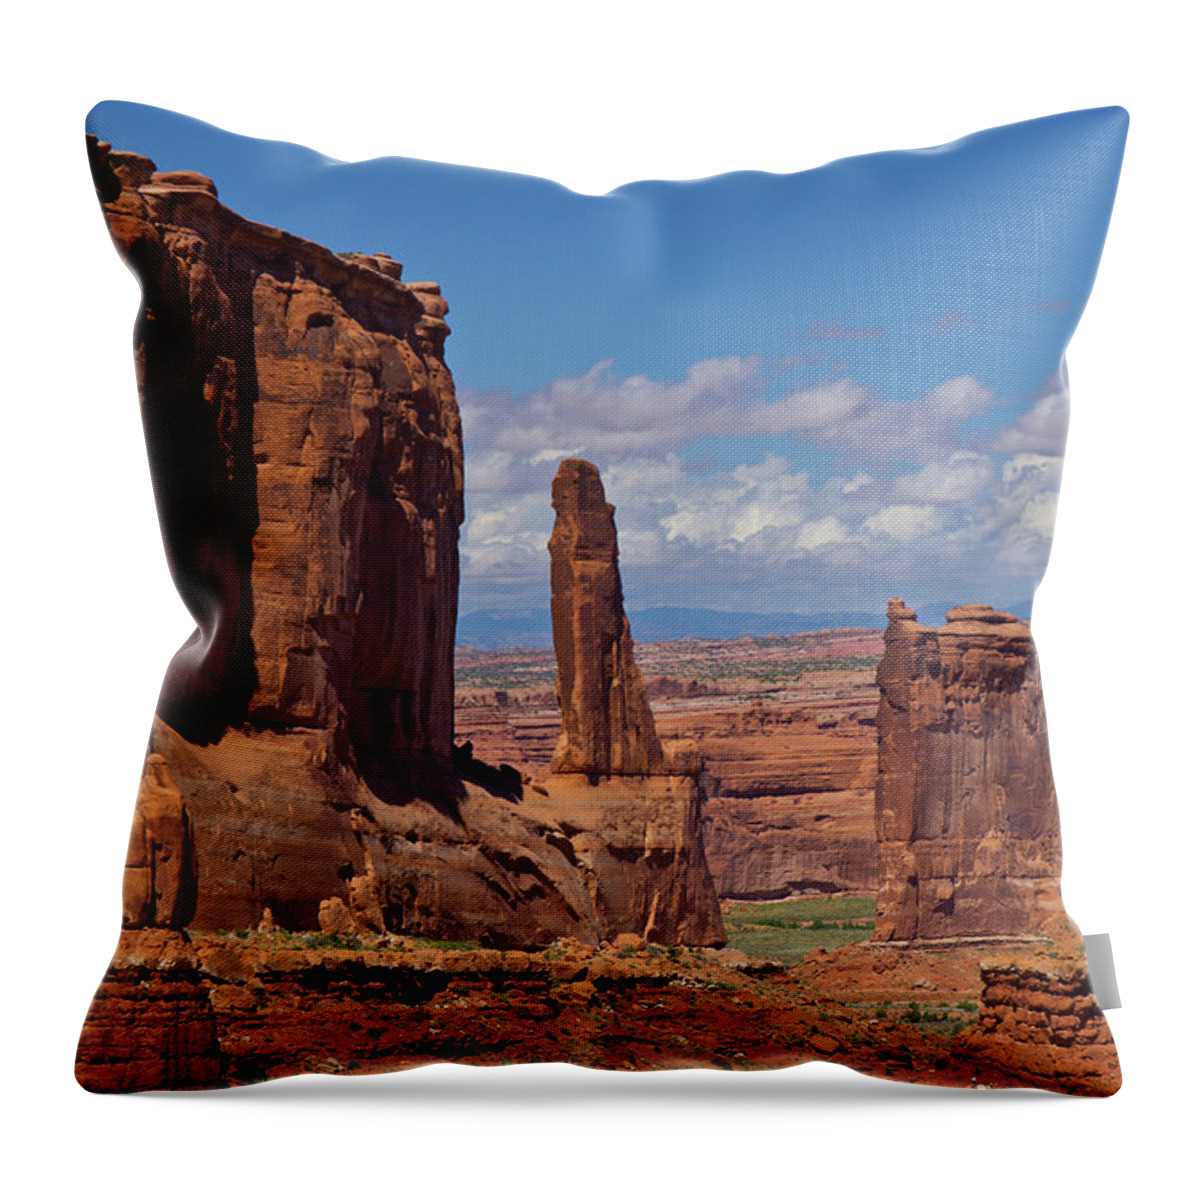 Arches National Park Throw Pillow featuring the photograph Arches National Park - 7960 by Jerry Owens